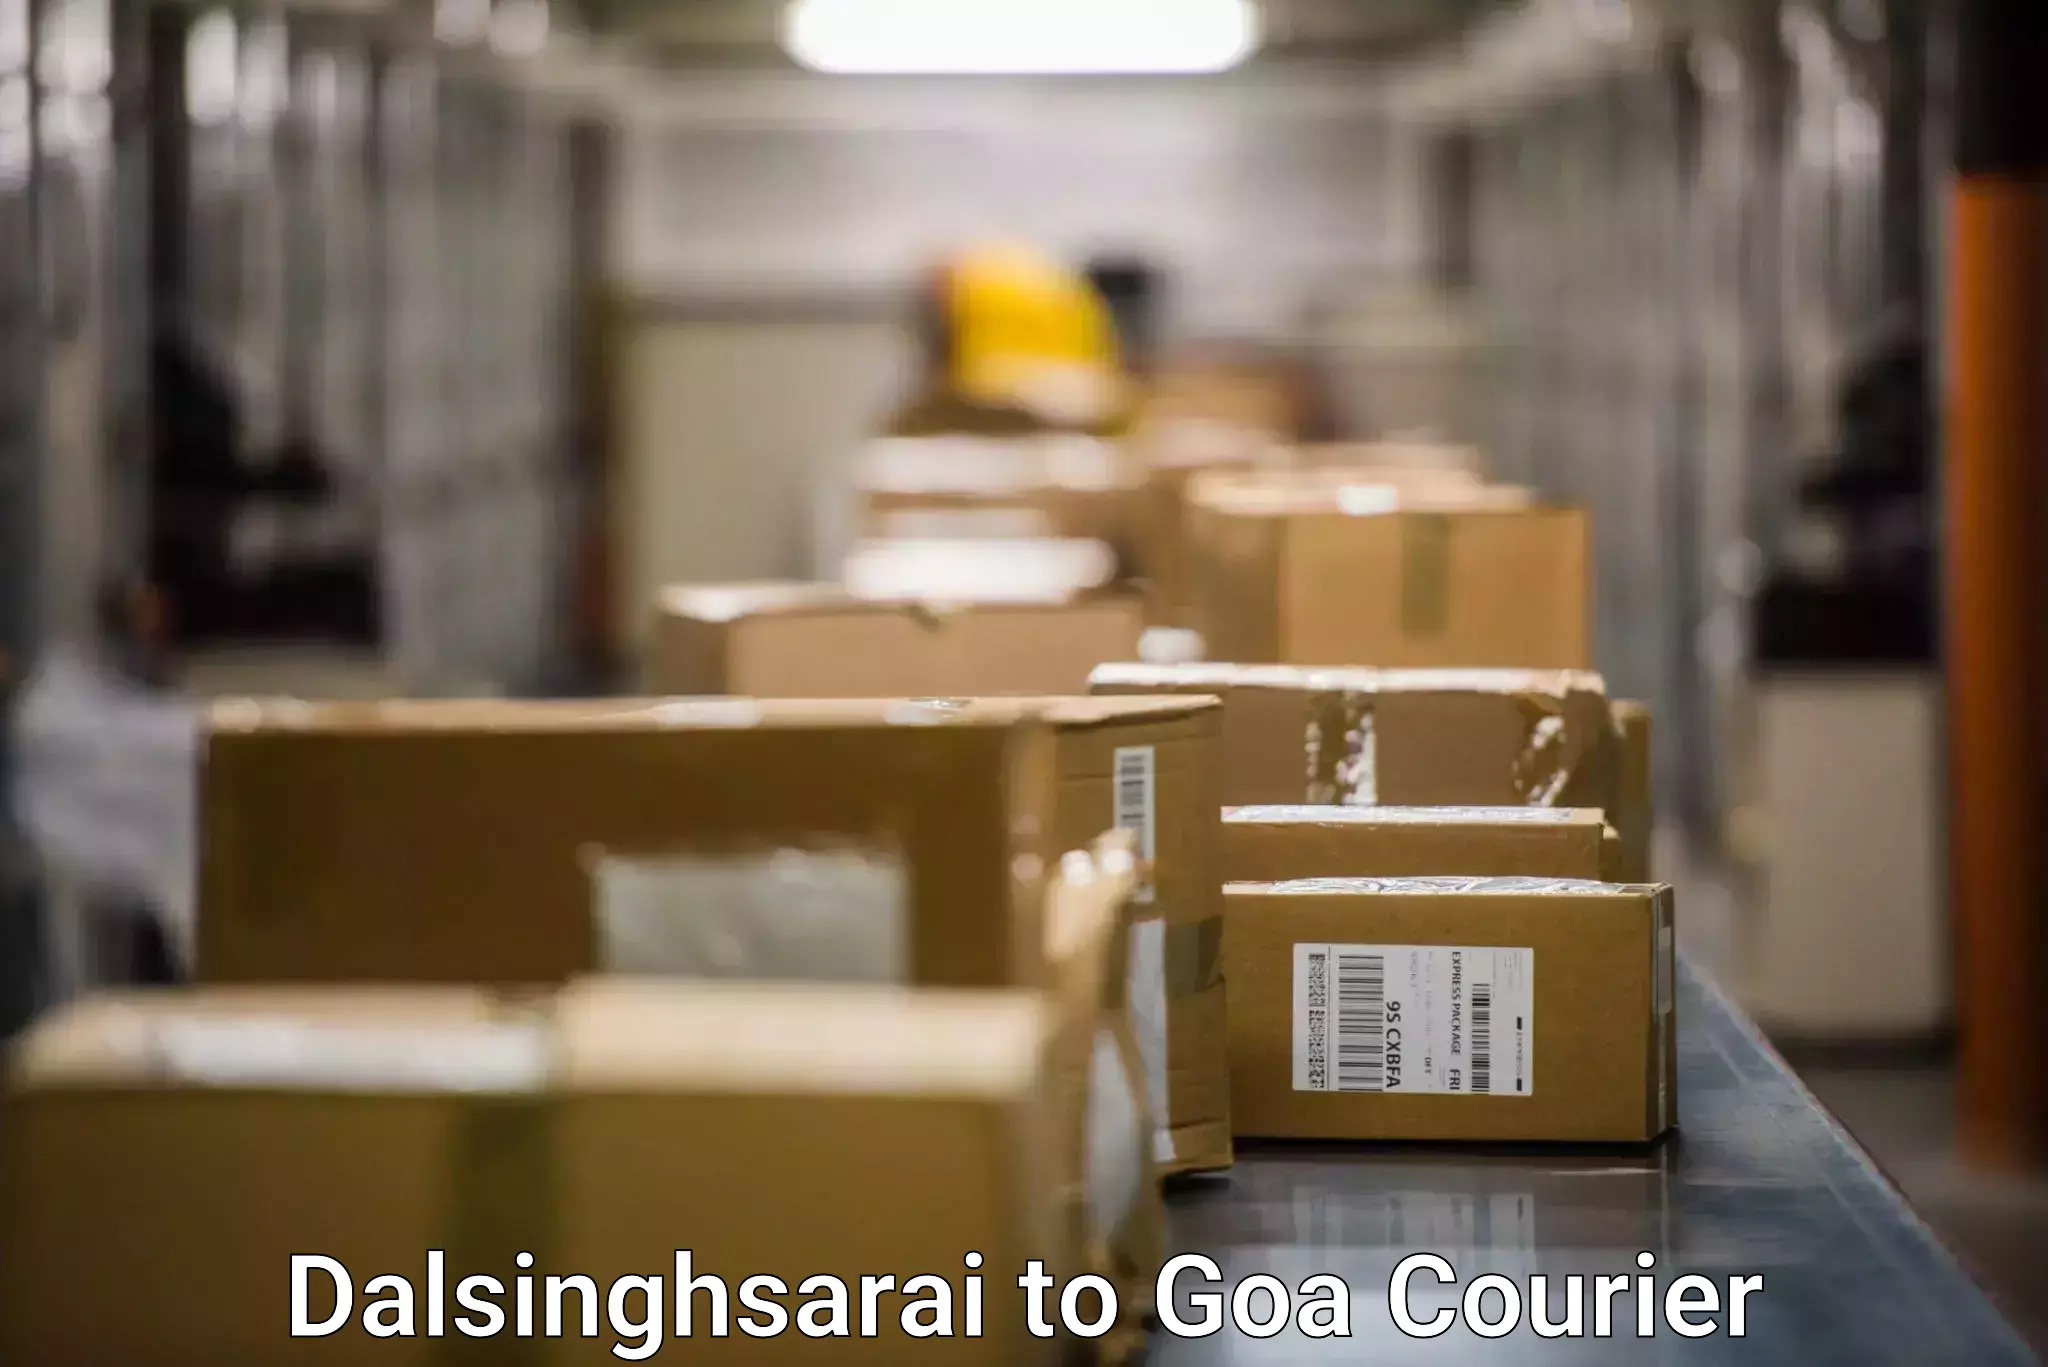 On-call courier service Dalsinghsarai to South Goa